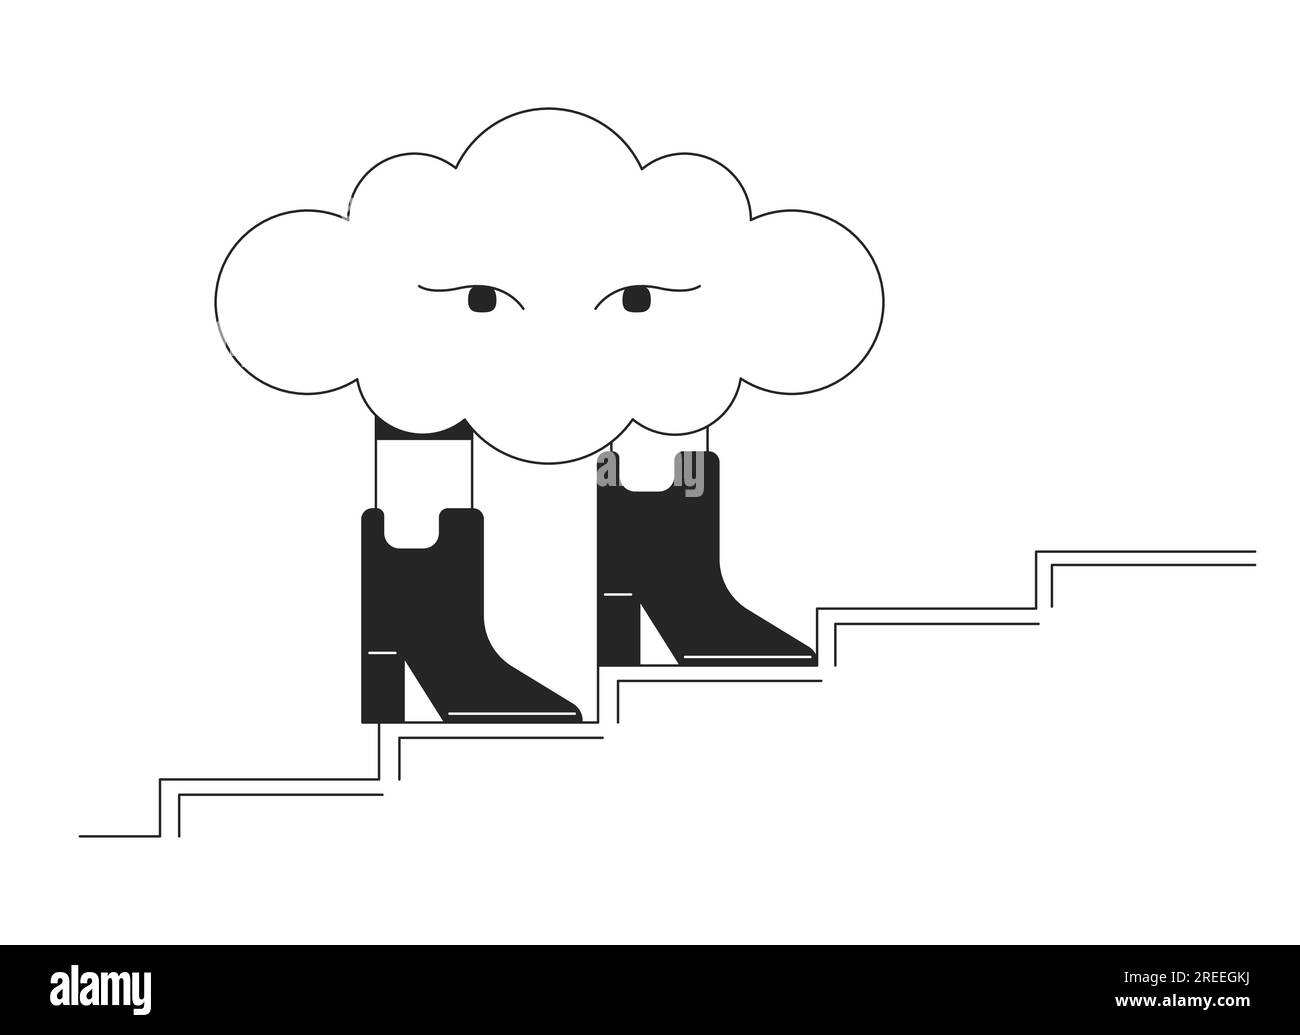 Surreal cloud walking in boots bw concept vector spot illustration Stock Vector